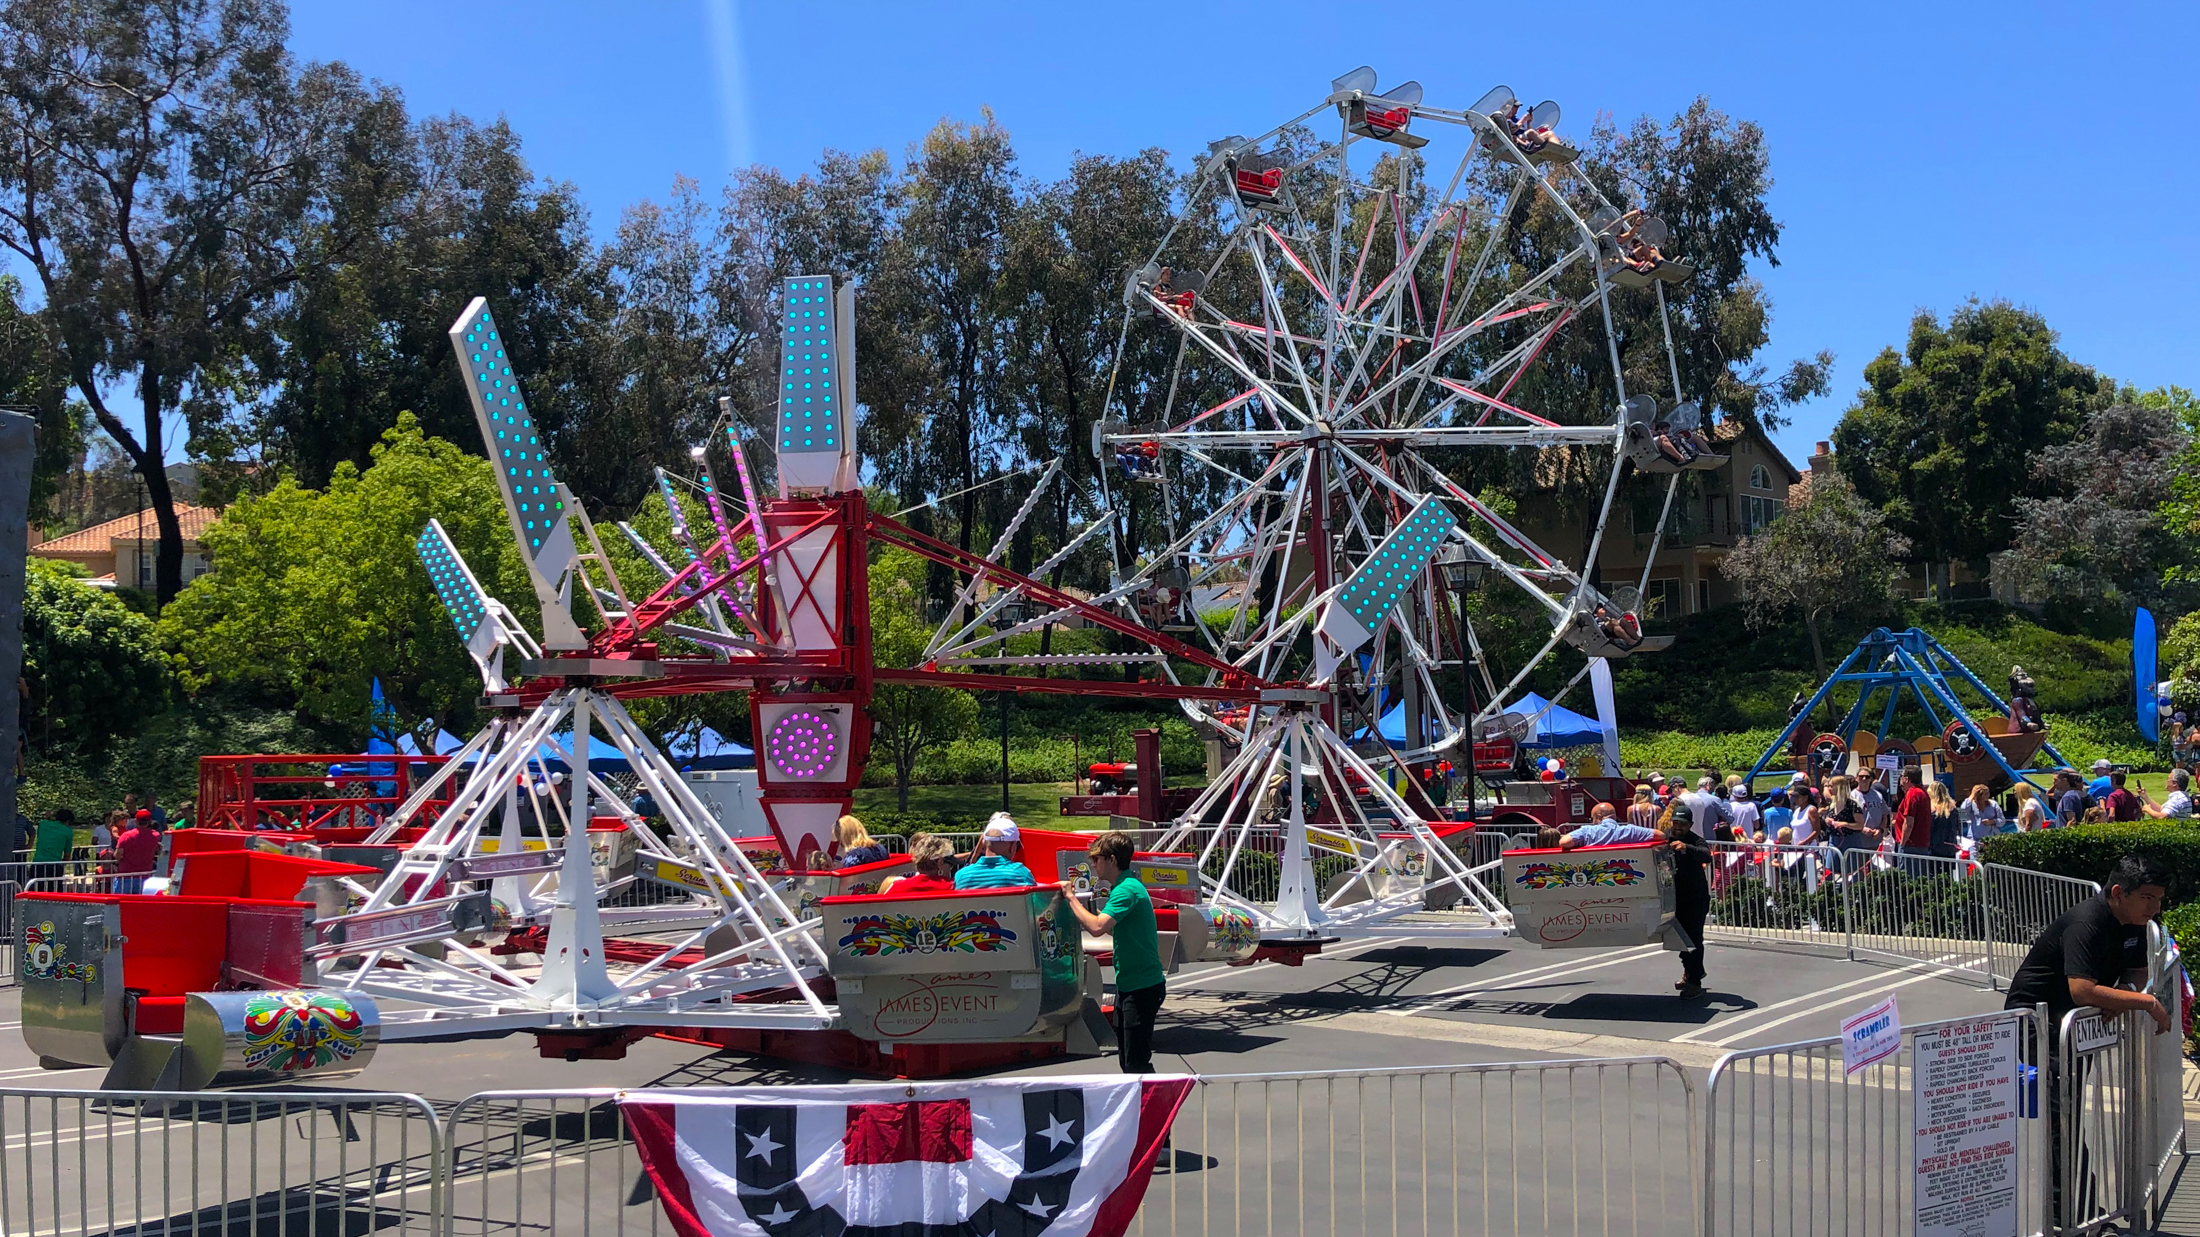 James Event Productions can provide a wide variety of carnival rides and attractions for your event - whether it's a school carnival , grad night or company picnic, your guests are sure to enjoy the thrill of a carnival midway.